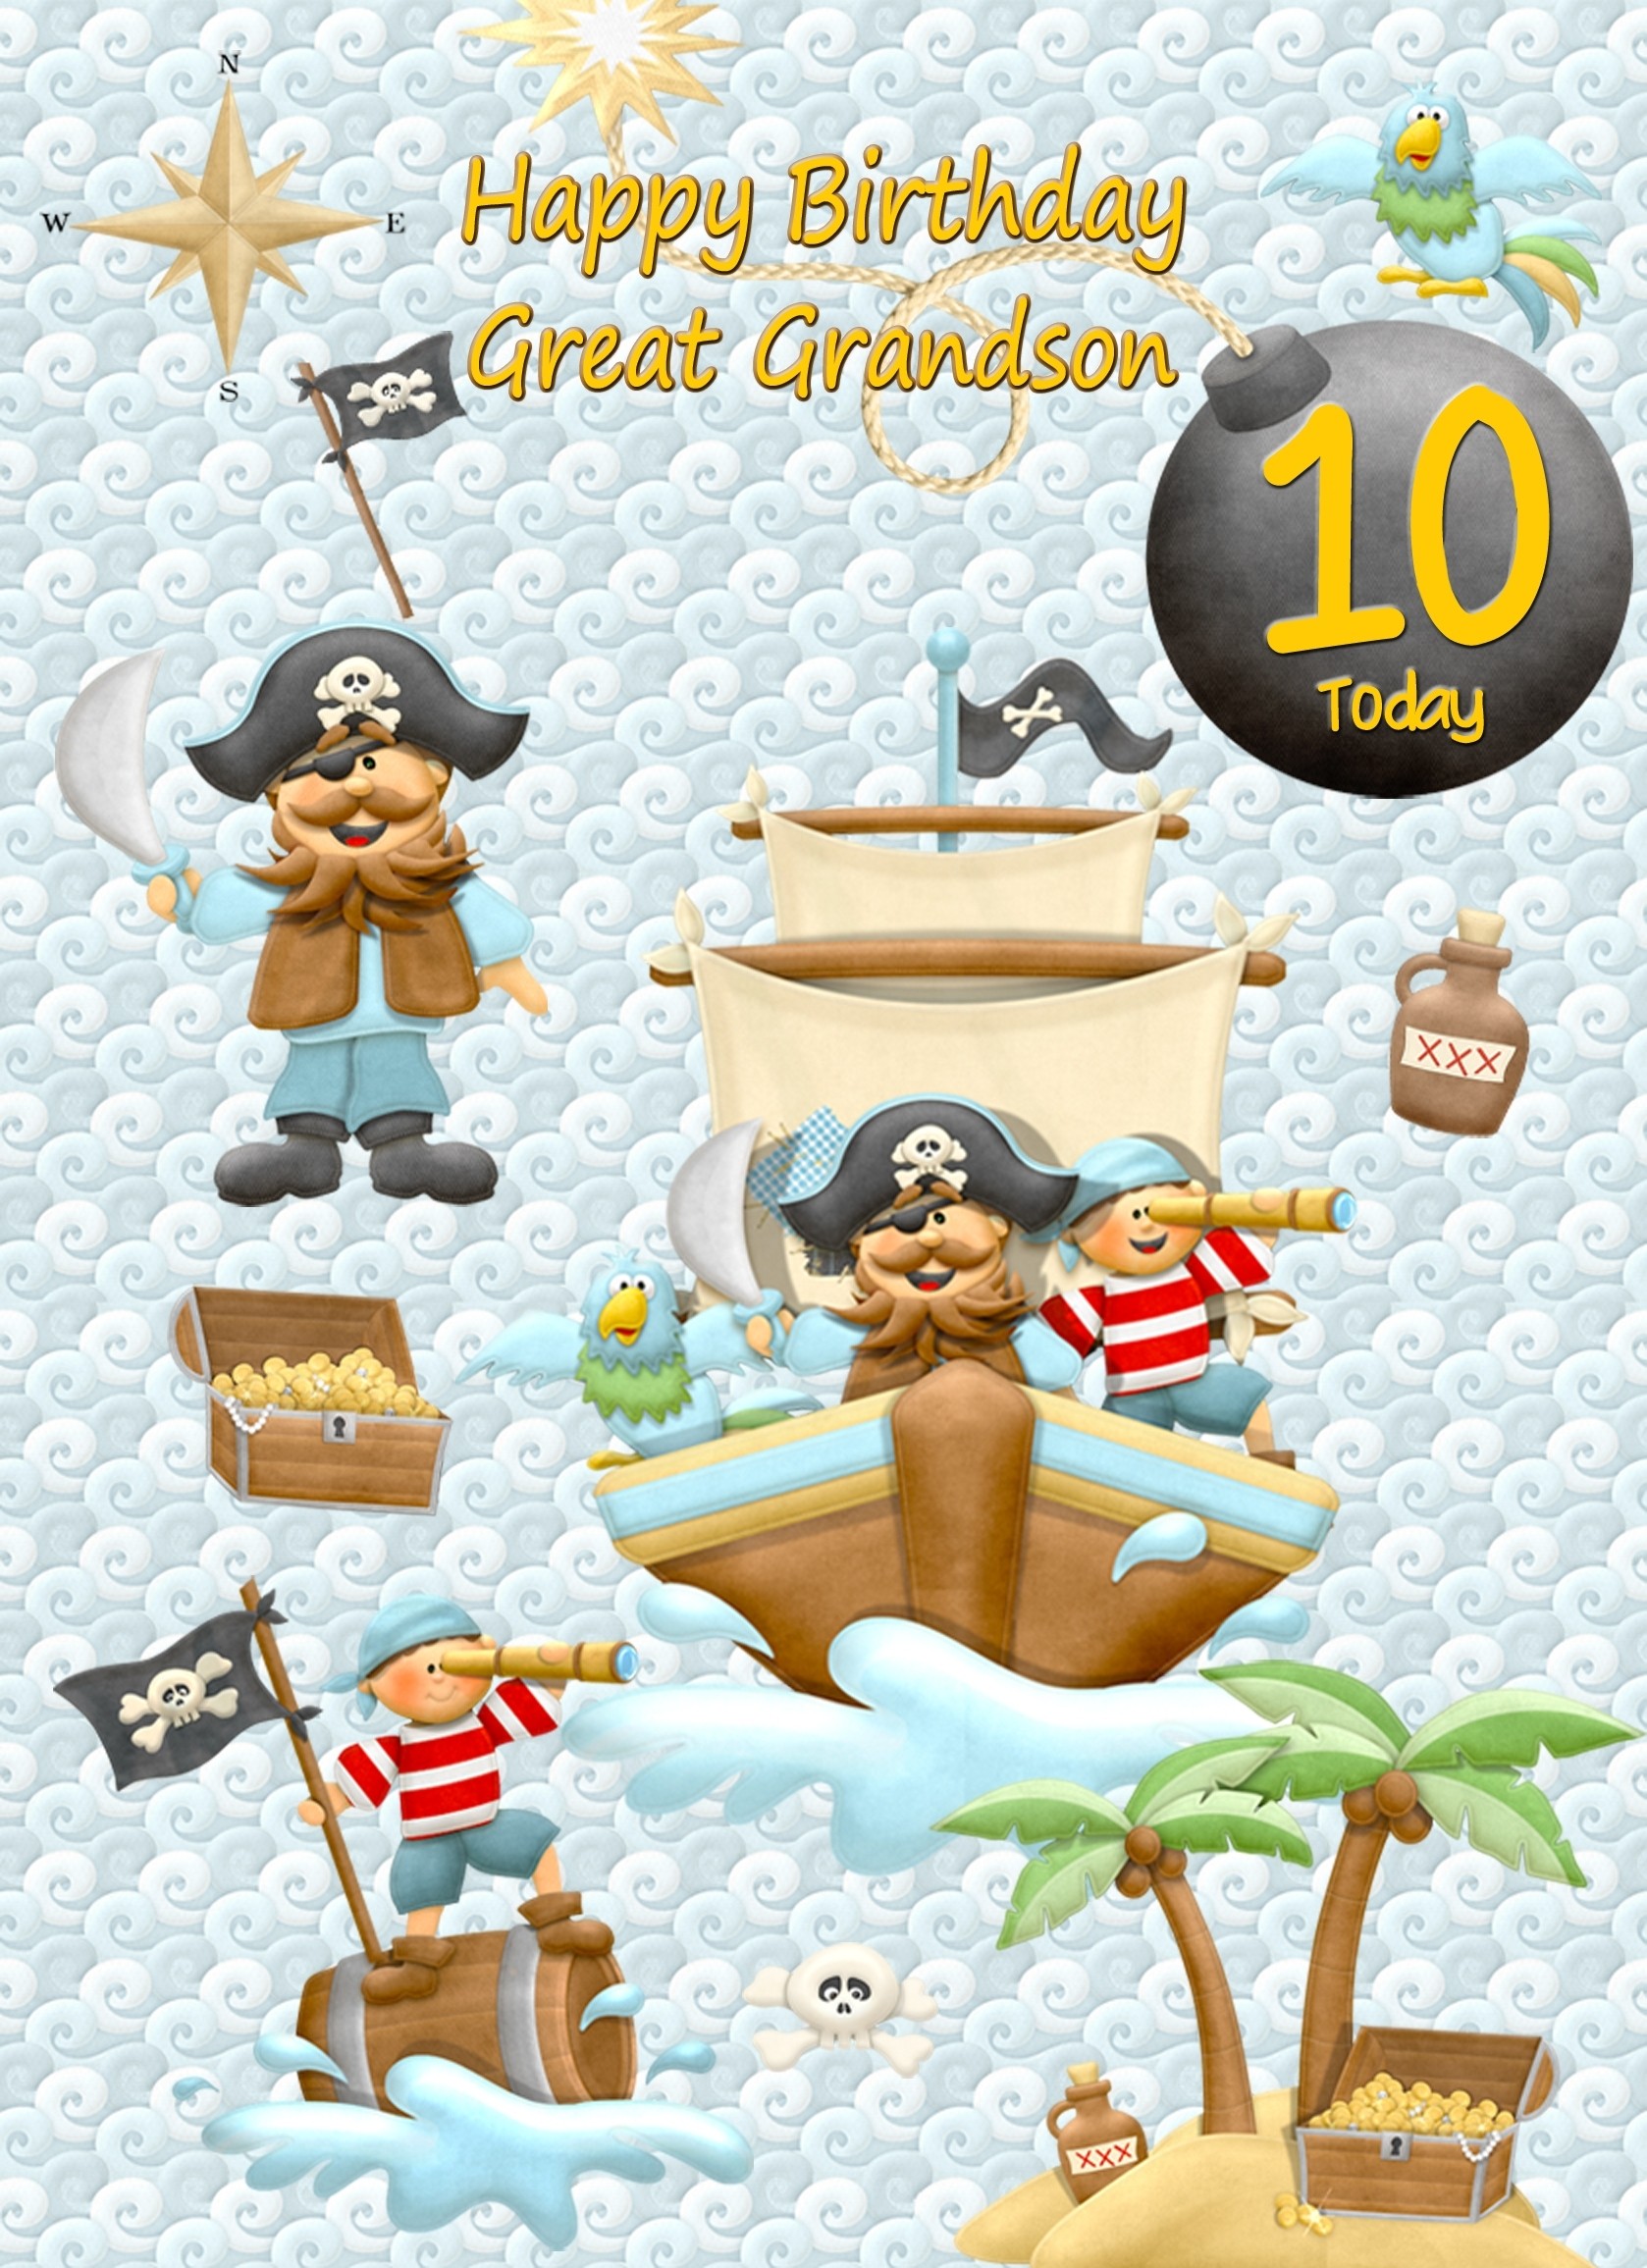 Kids 10th Birthday Pirate Cartoon Card for Great Grandson